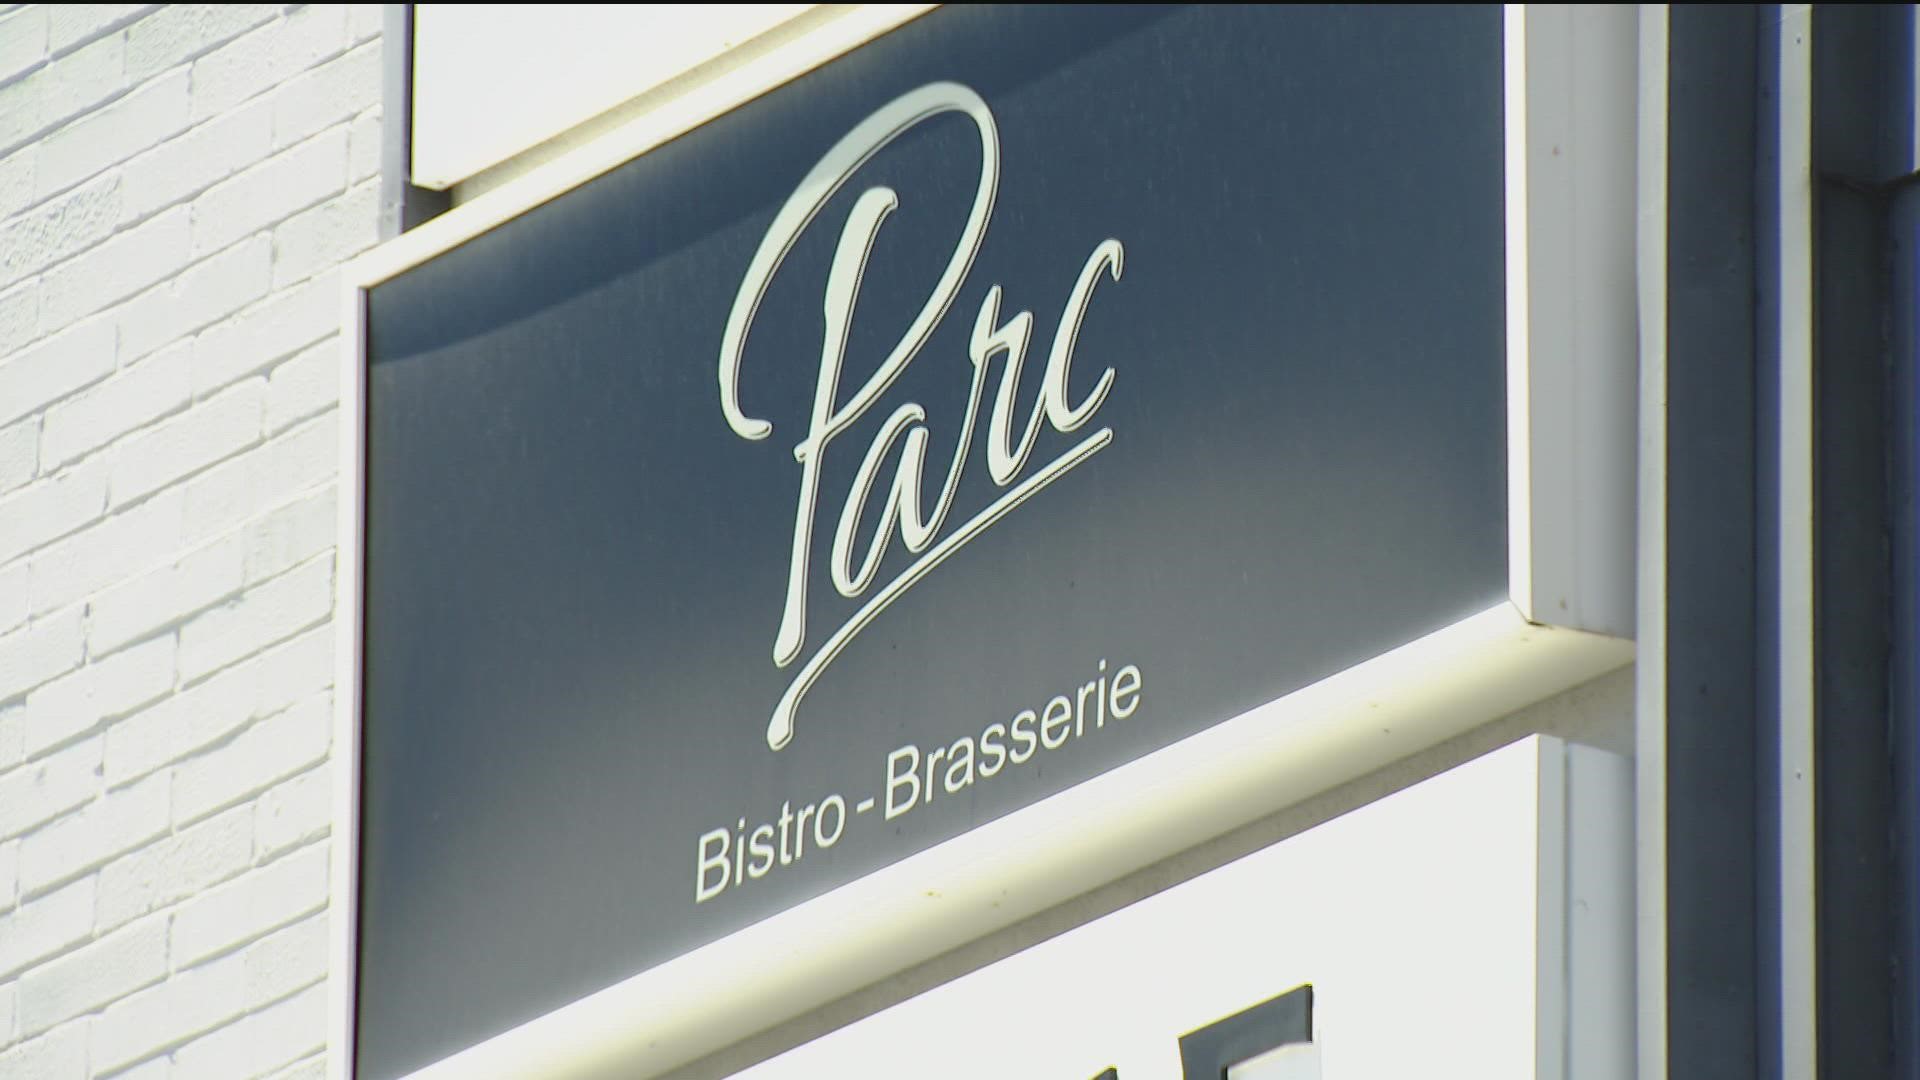 Parc Bistro-Brasserie is a family-owned, seafood-French bistro located in Bankers Hill.